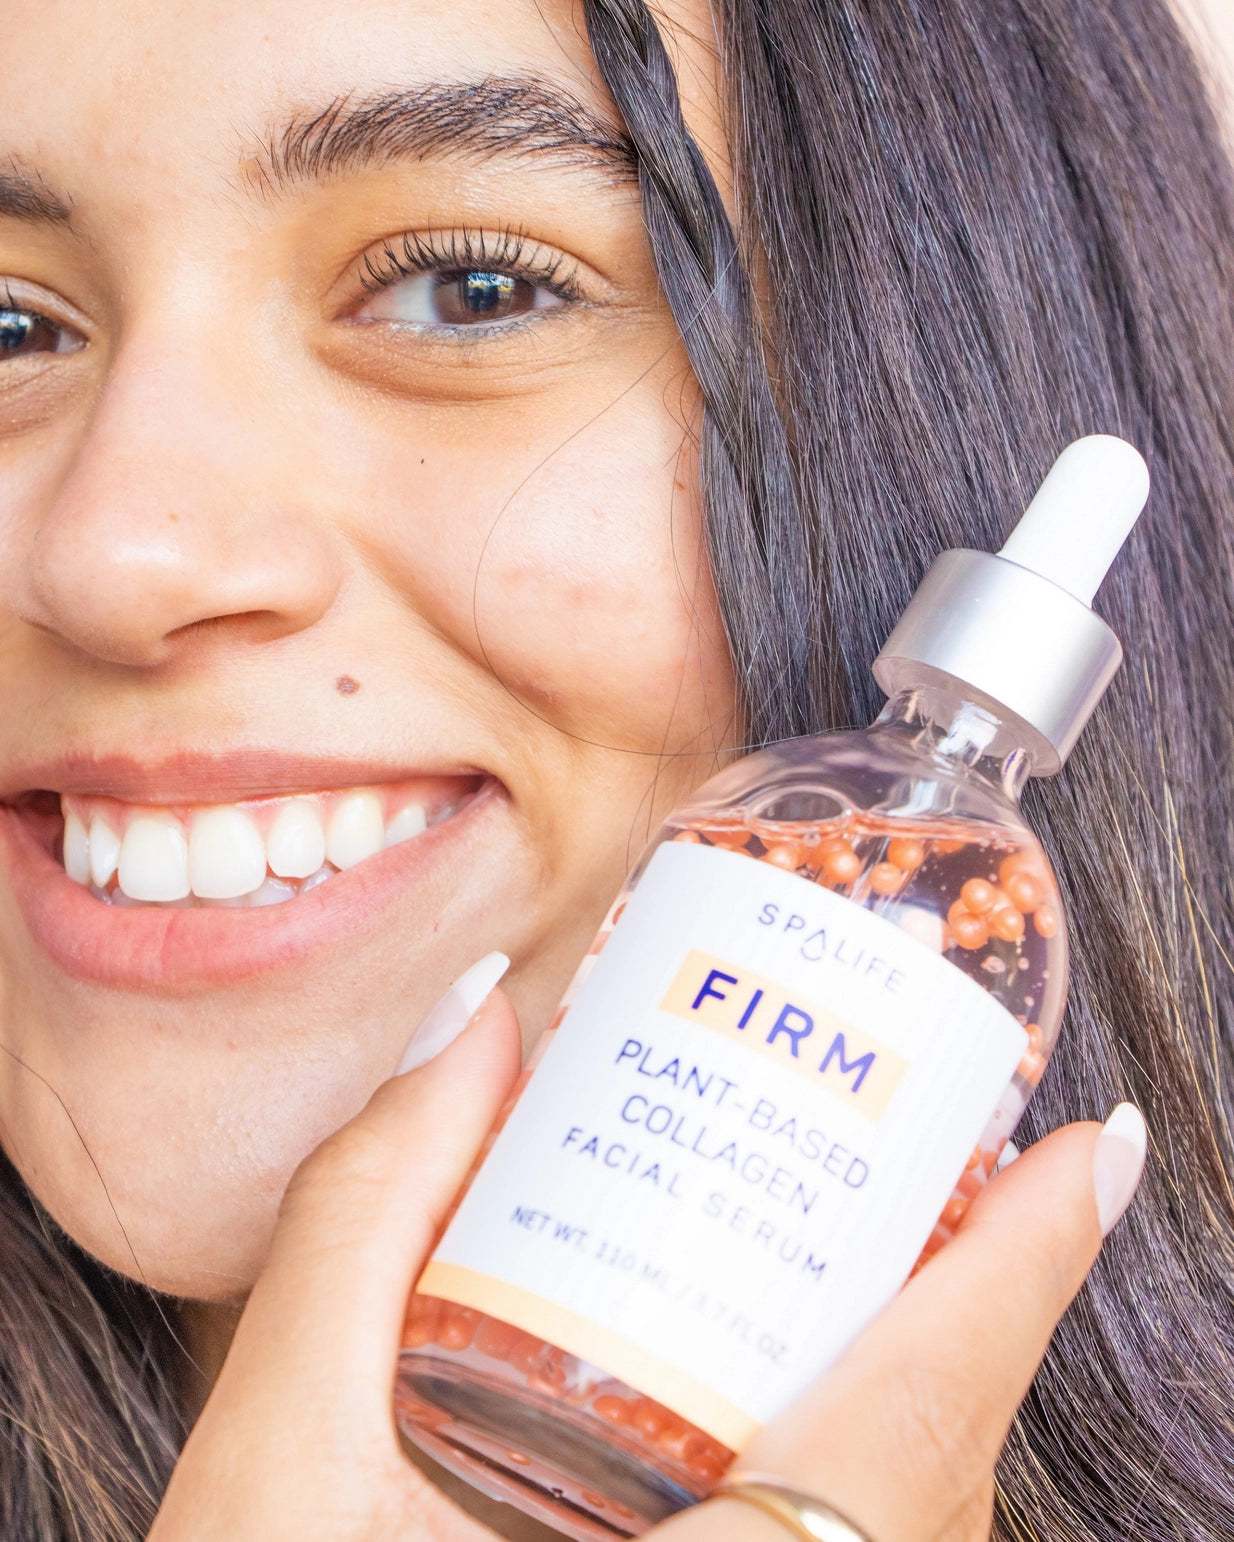 FIRM Plant Based Collagen Facial Serum